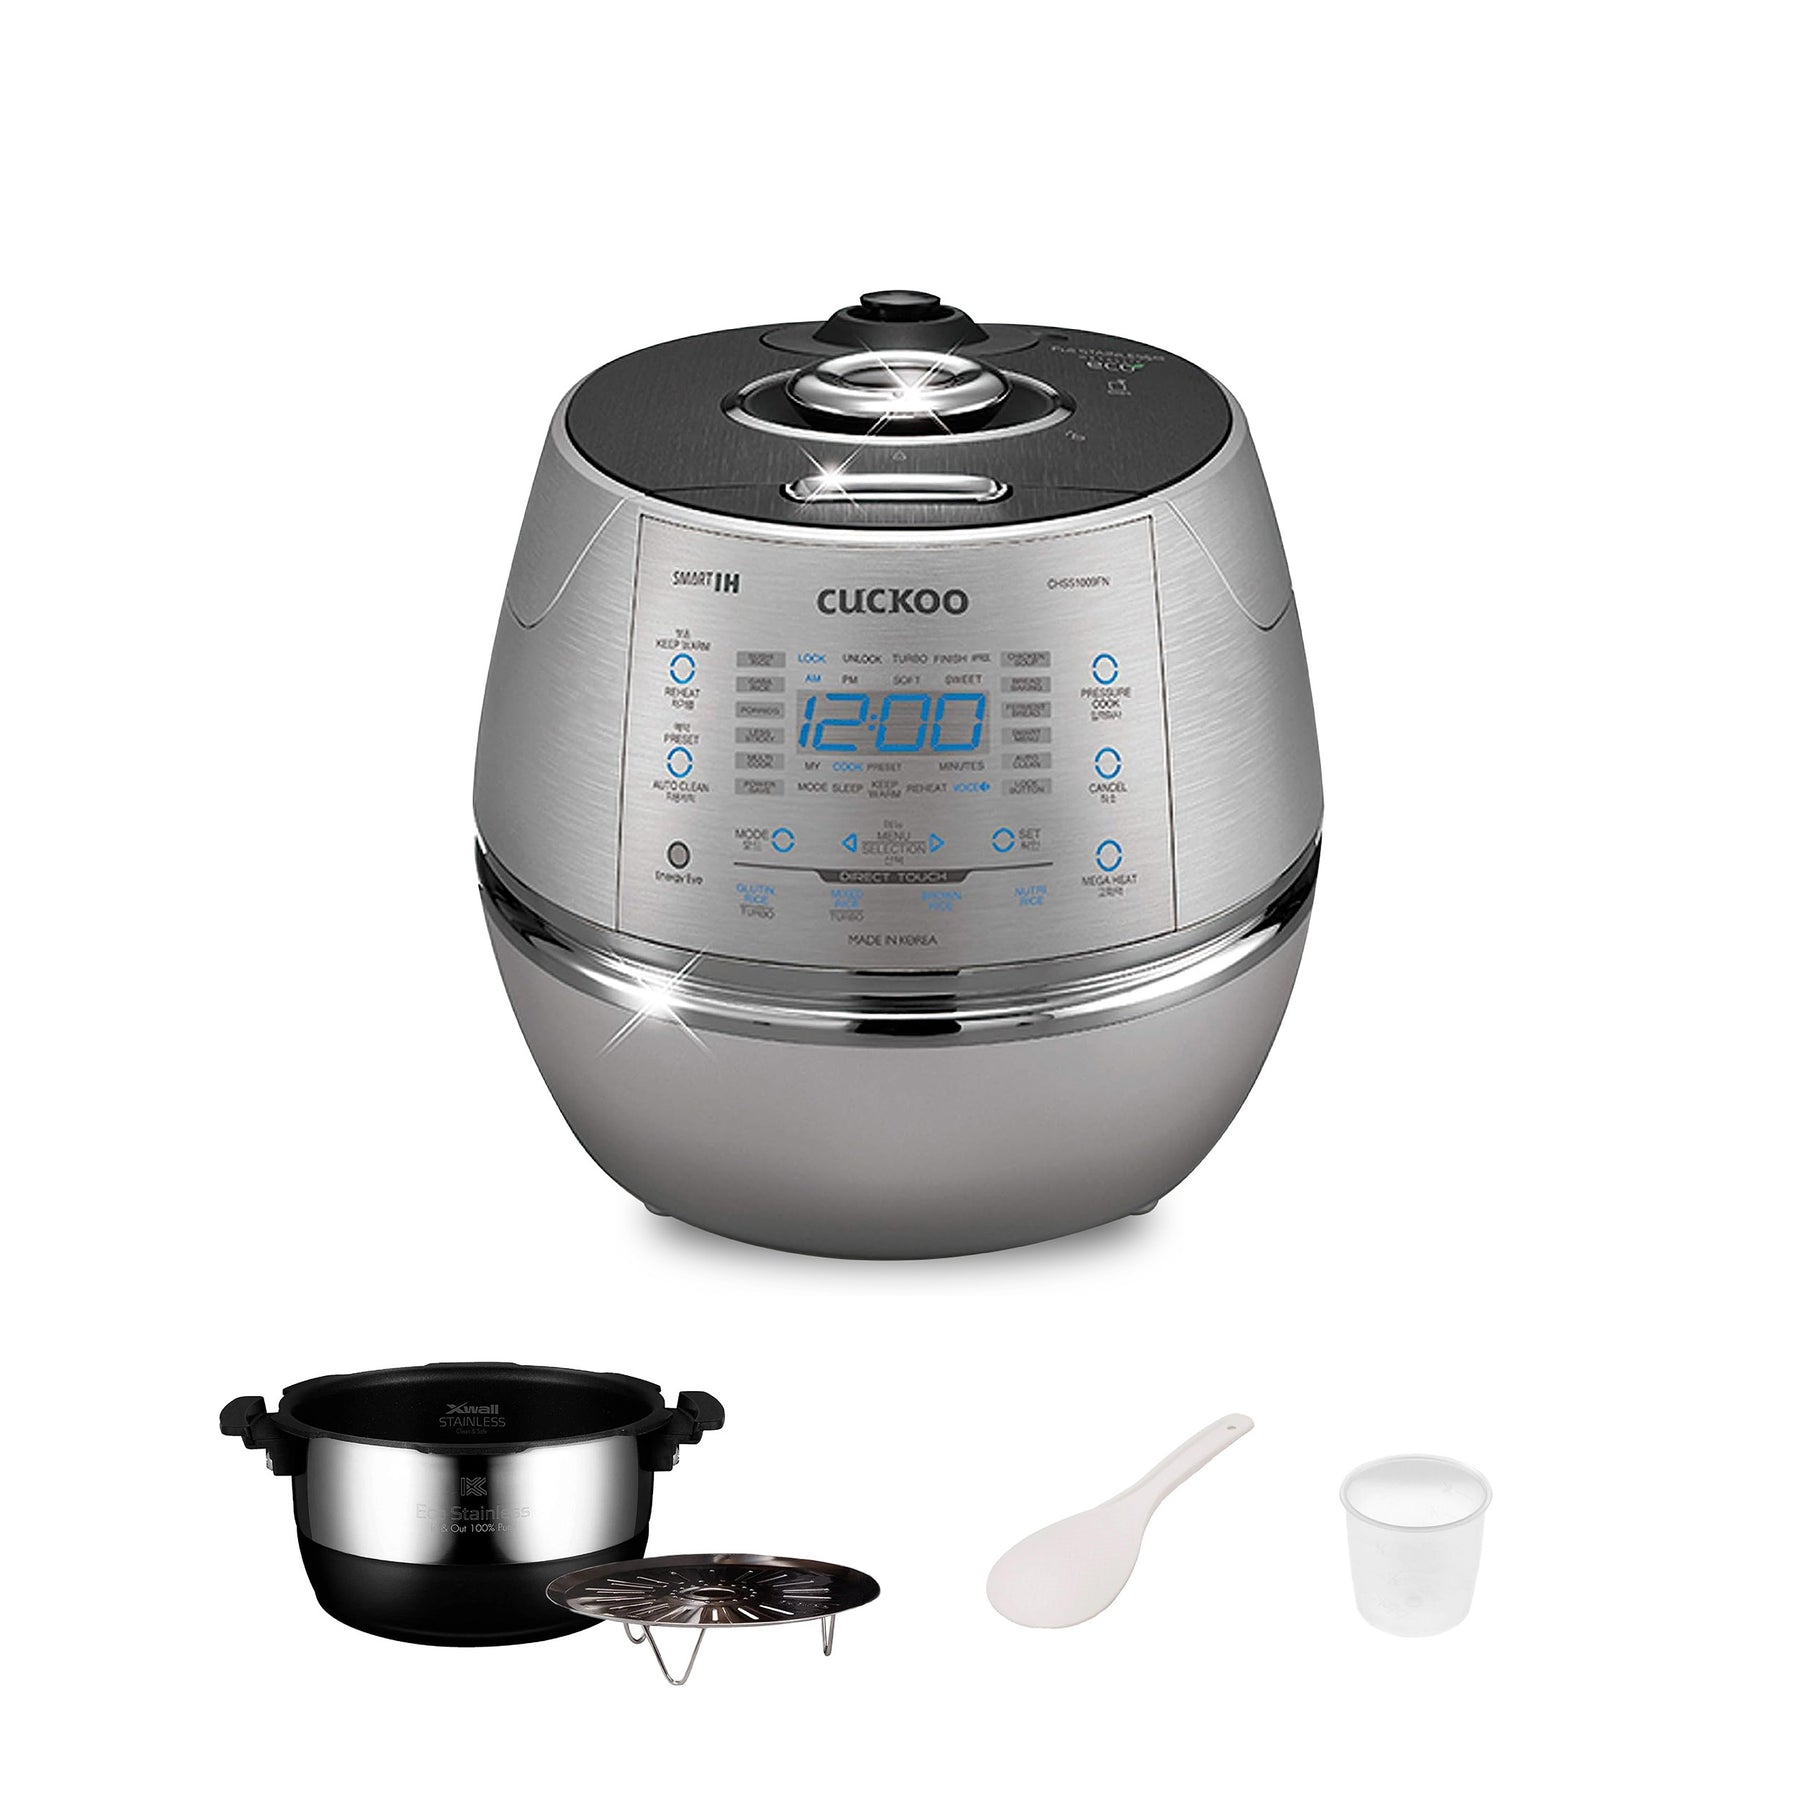 Wholesale Pressure Cooker Hot Sale Cooking Appliances Big Rice Cooker